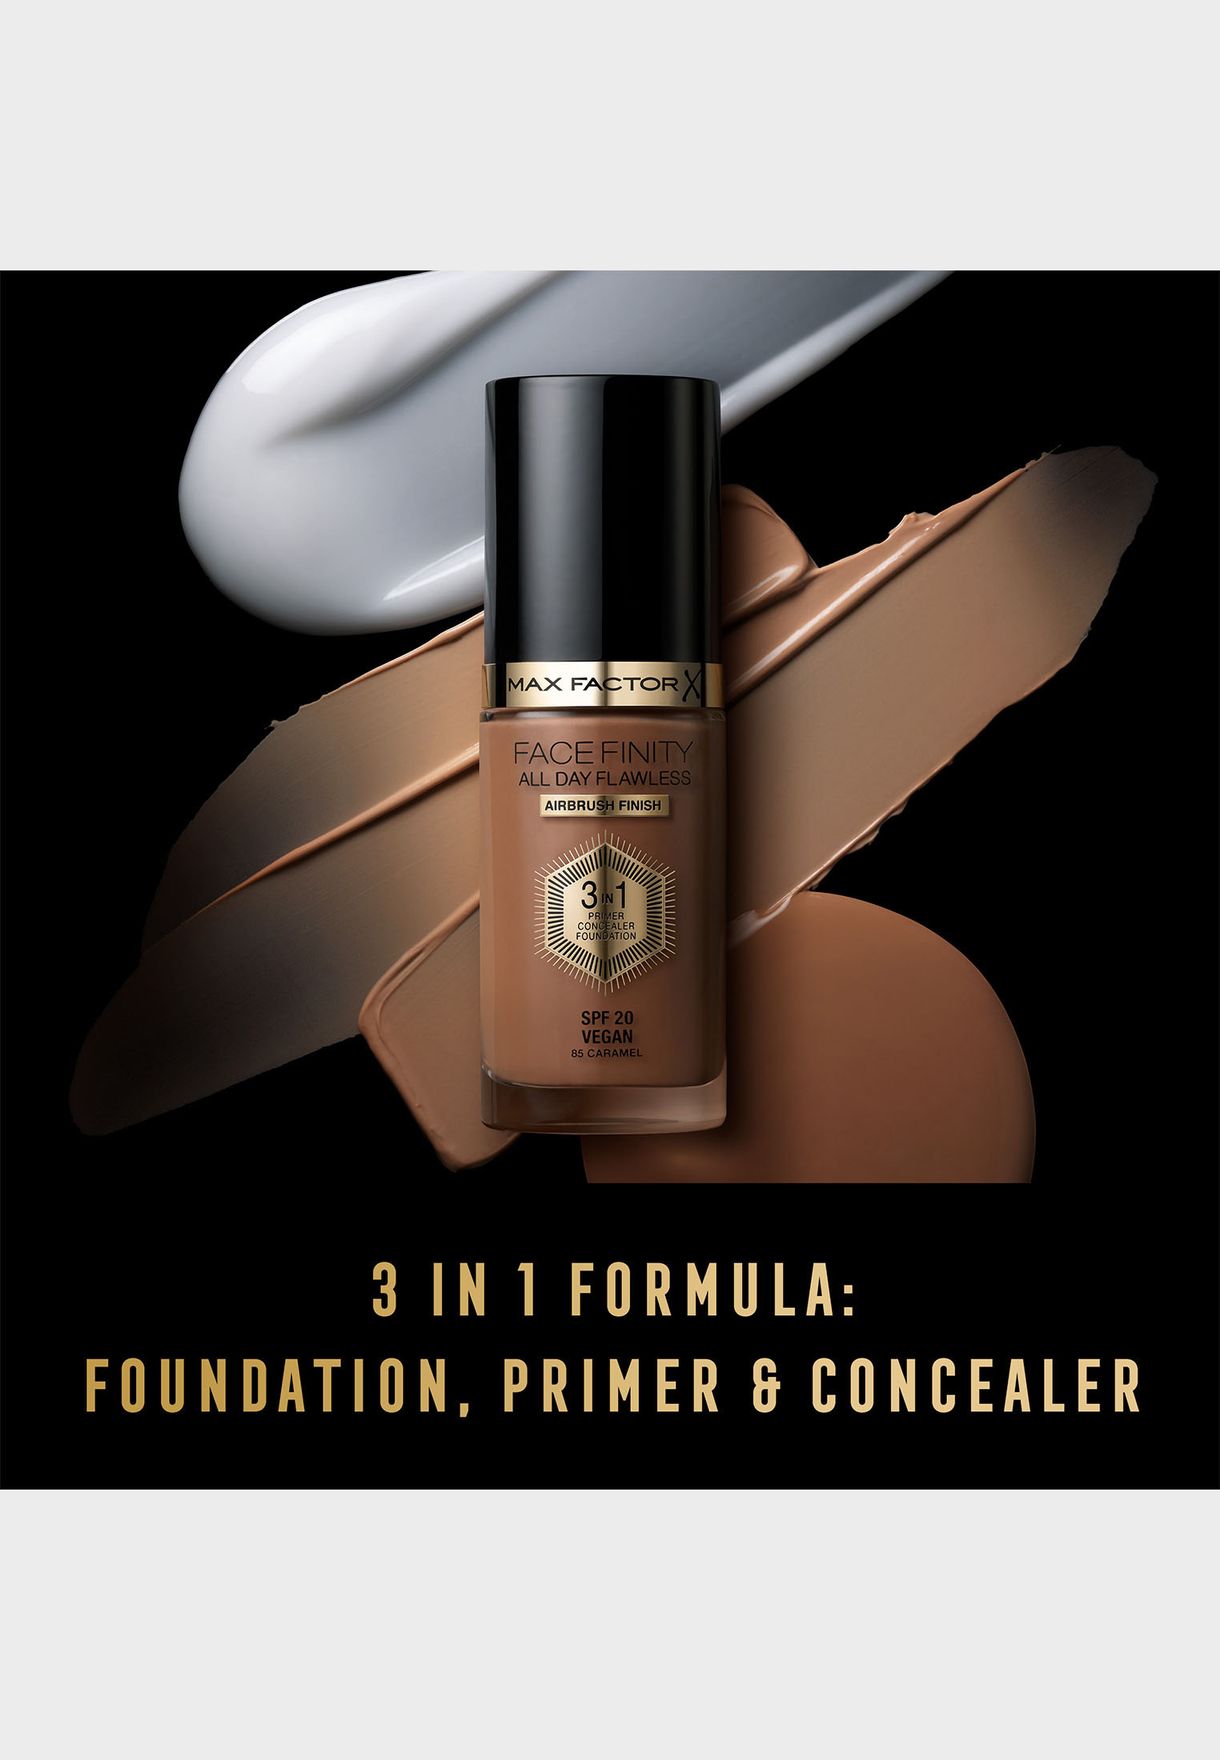 Facefinity All Day Flawless 3 In 1 Foundation - 33 Crystal Beige, 30Ml